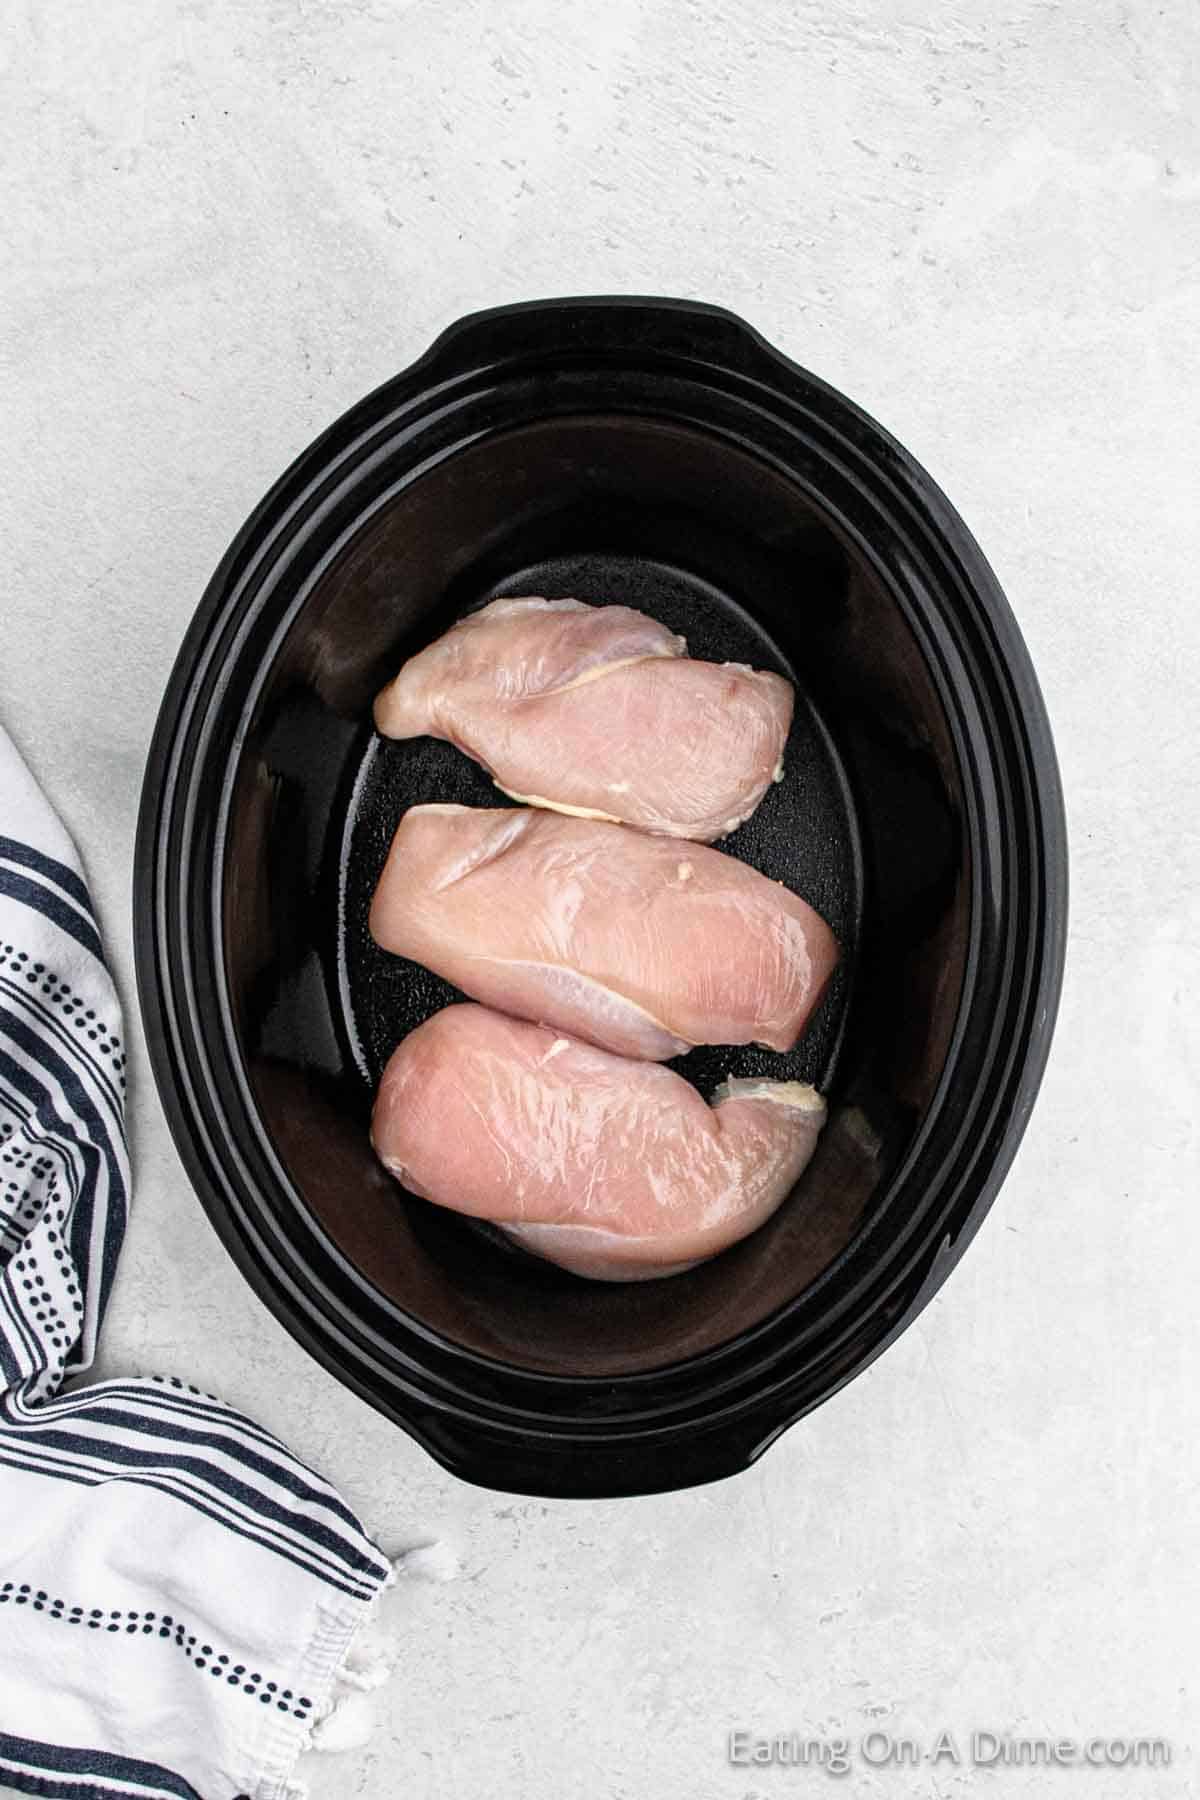 Placing the chicken breast in the slow cooker